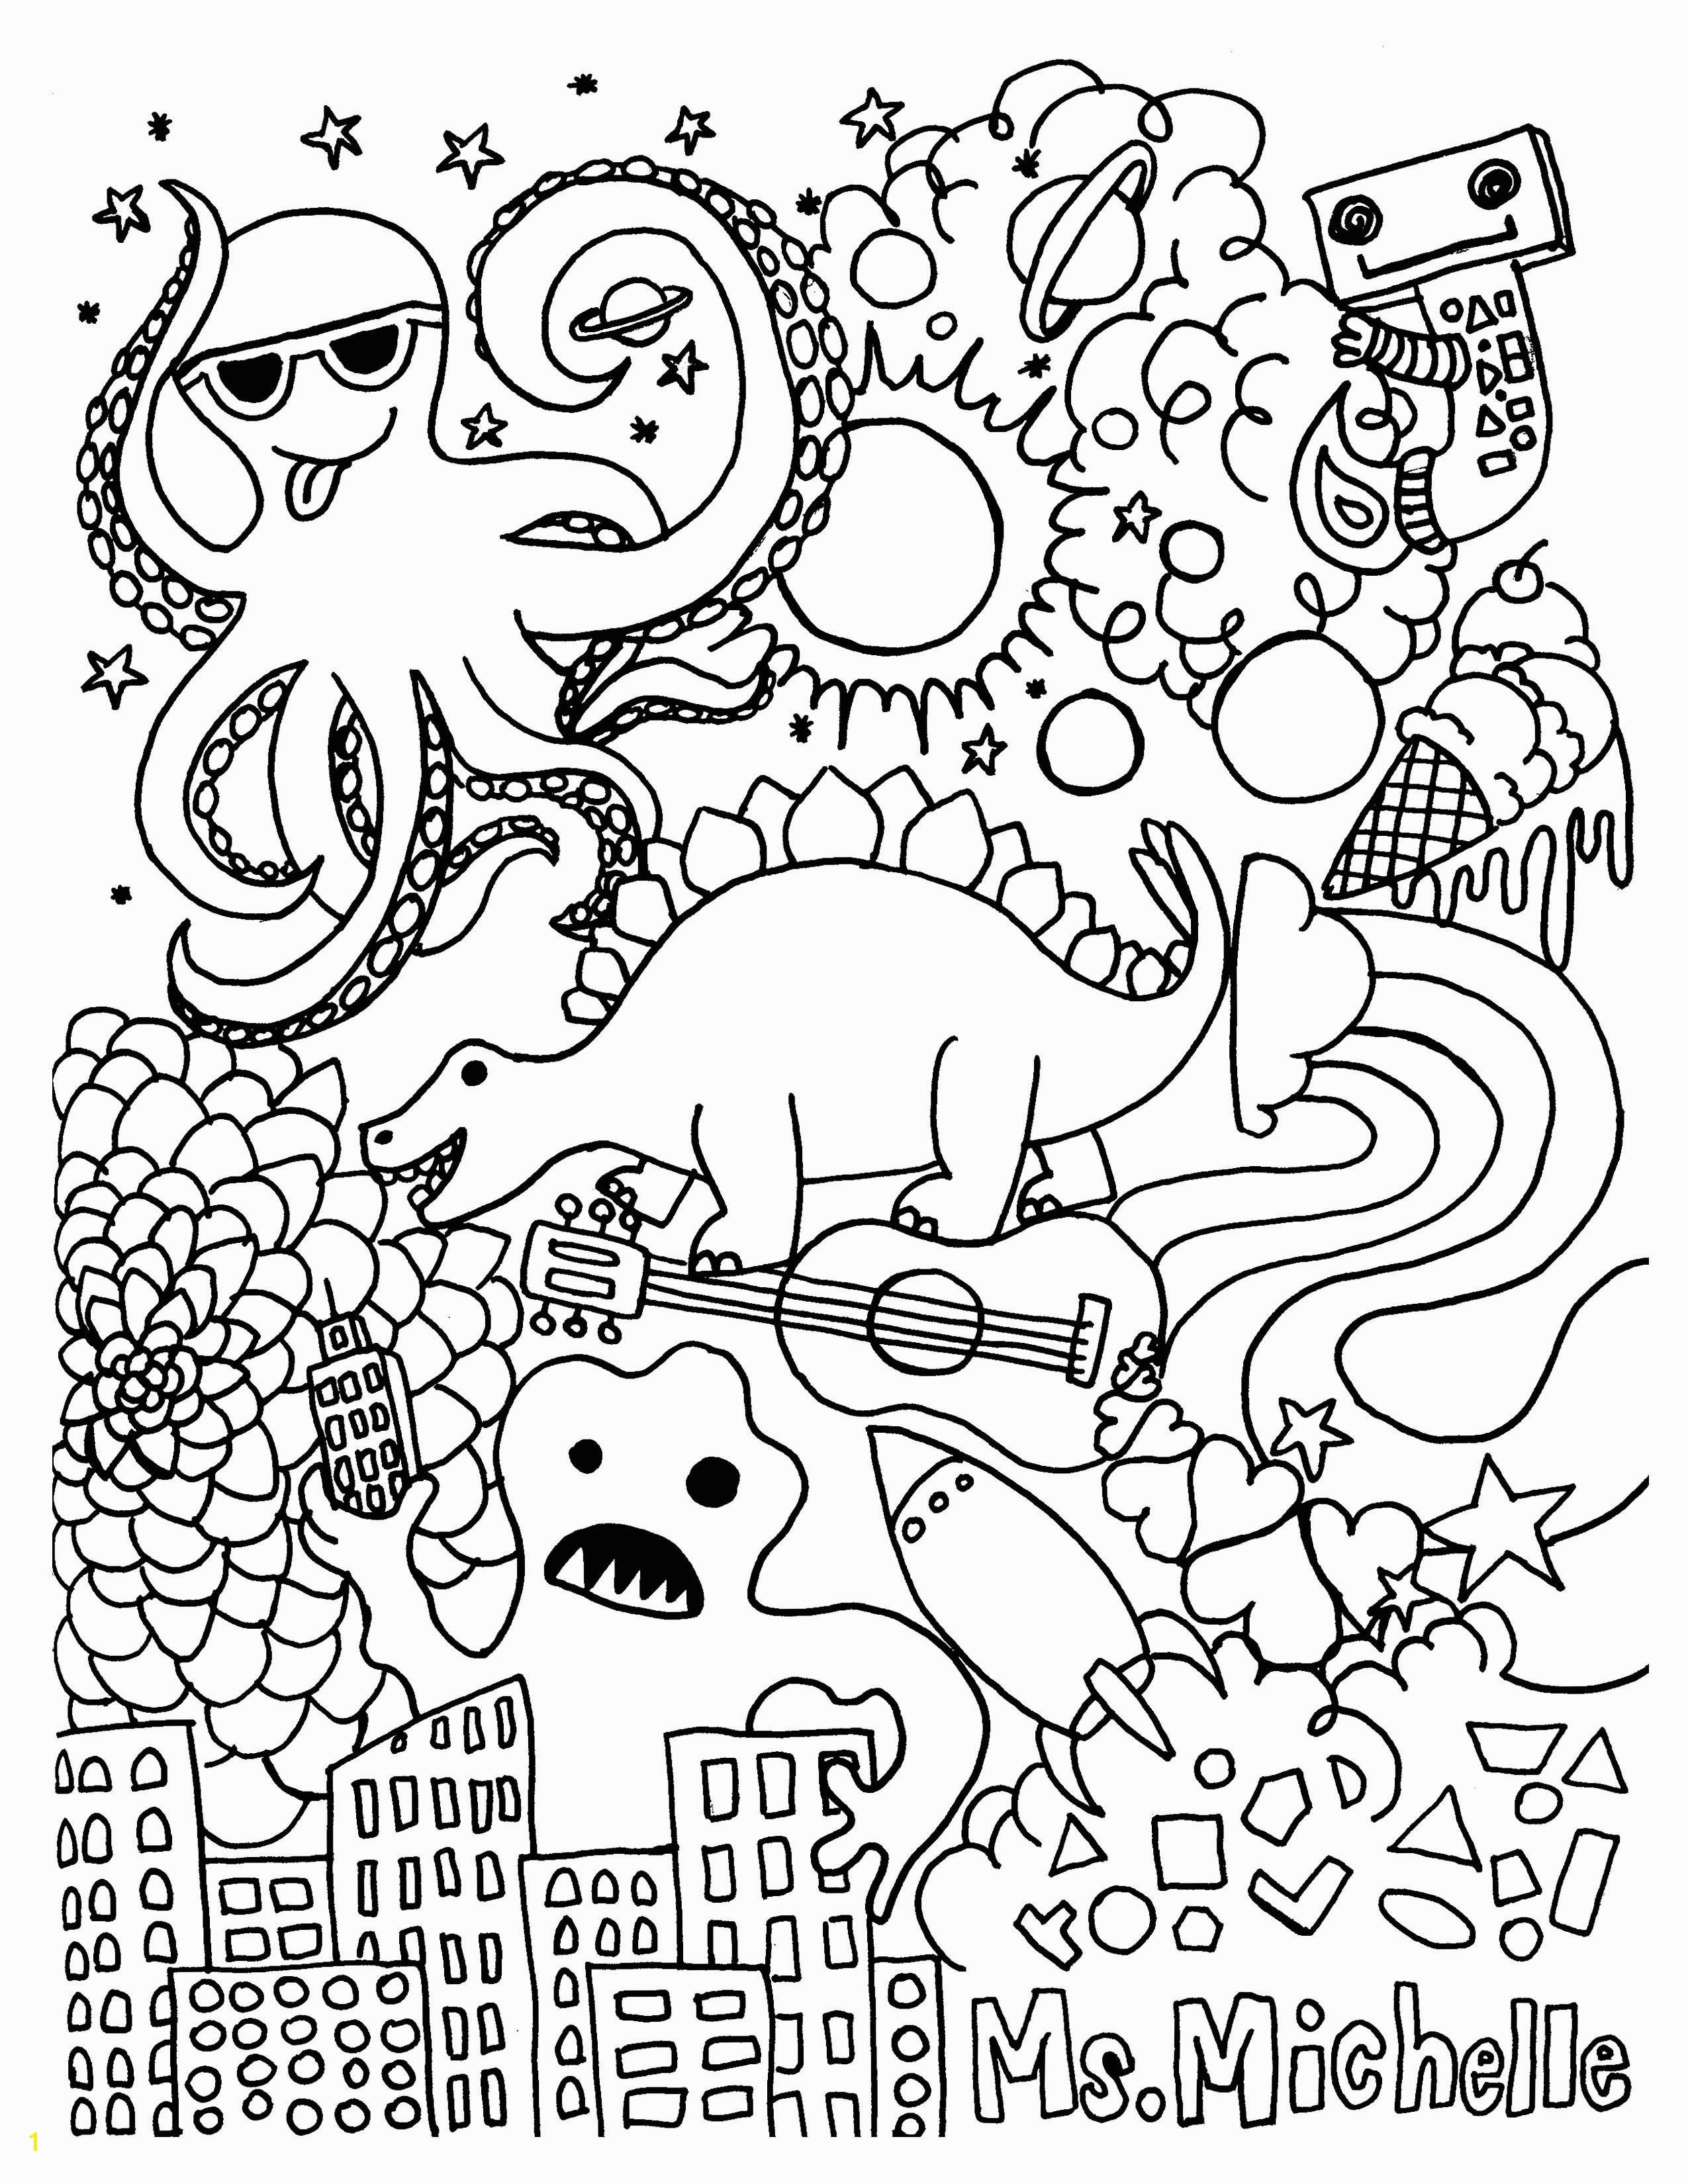 Coloring Pages with Number Codes 13 Fresh Coloring Pages with Number Codes